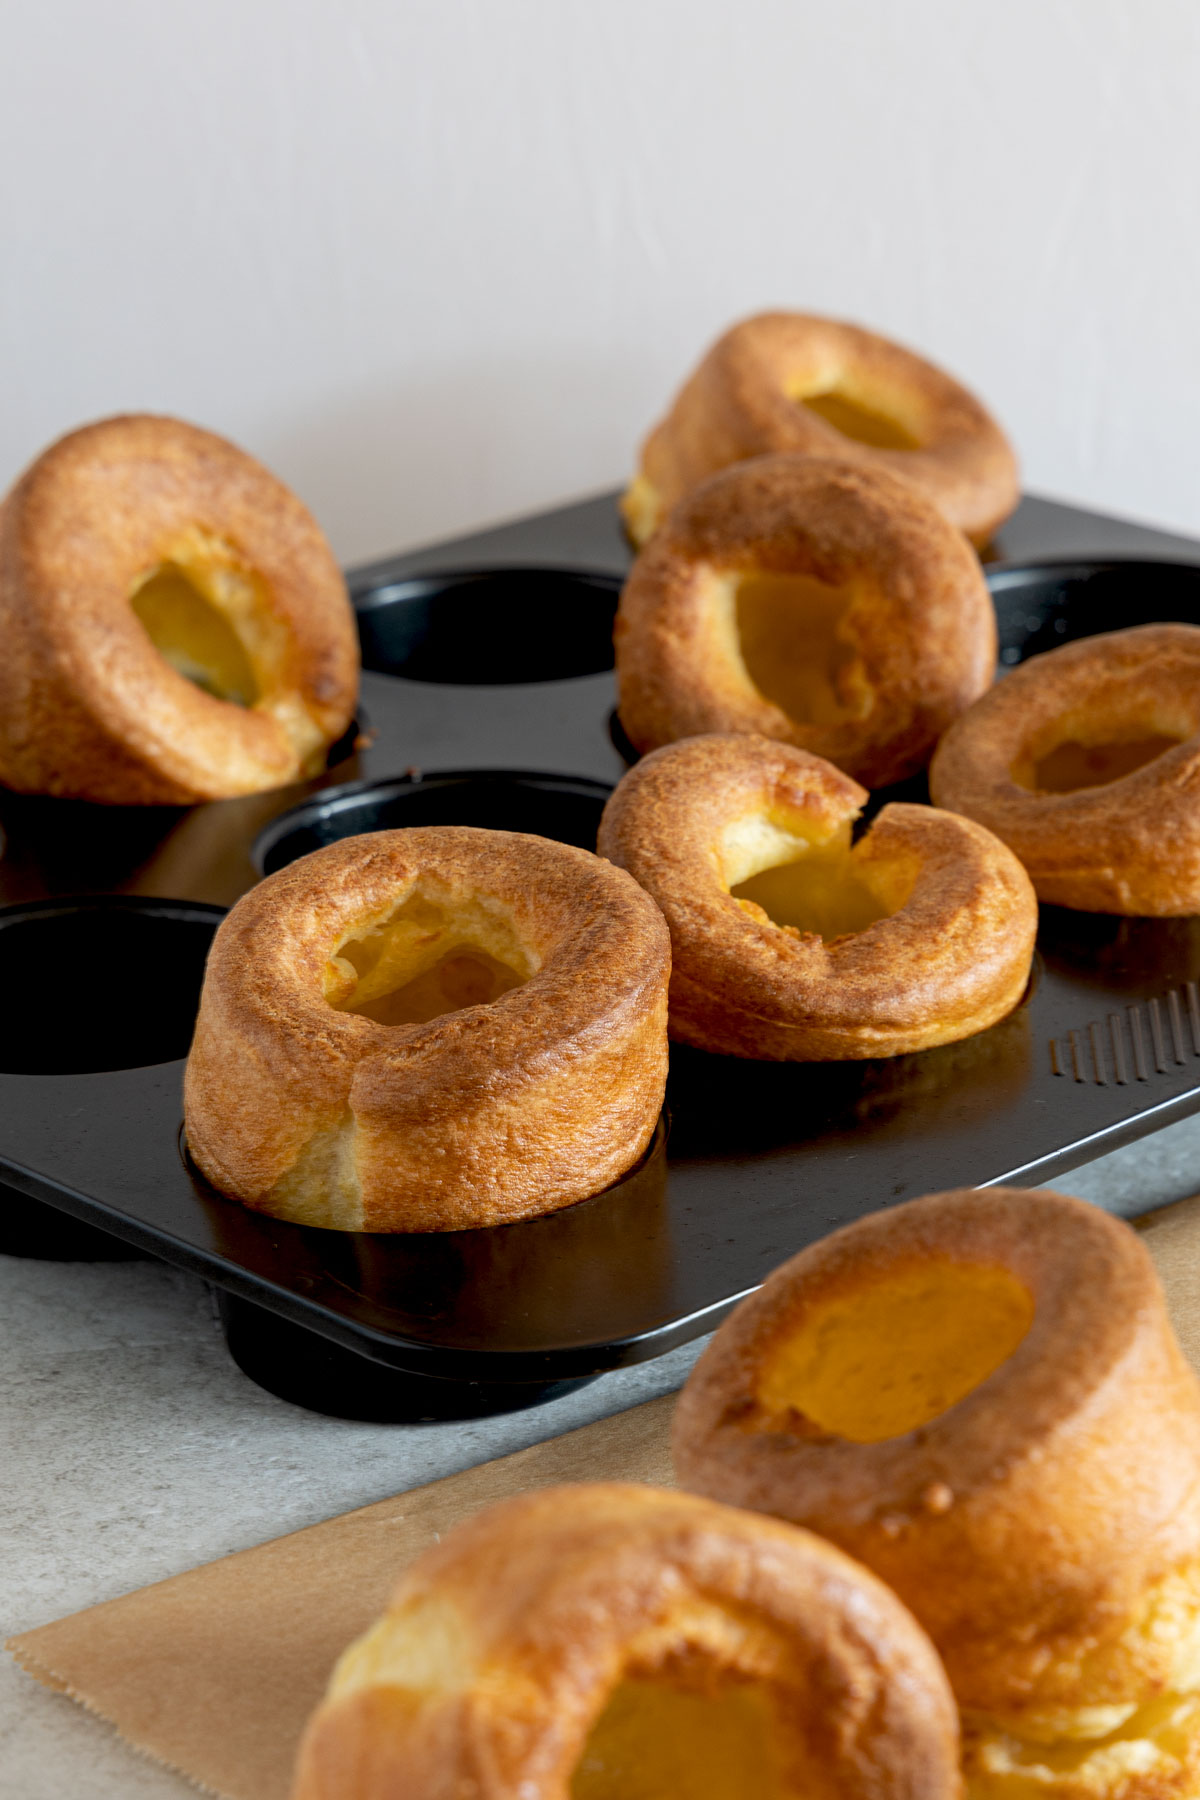 Baked golden brown Yorkshire Puddings on a metal tray